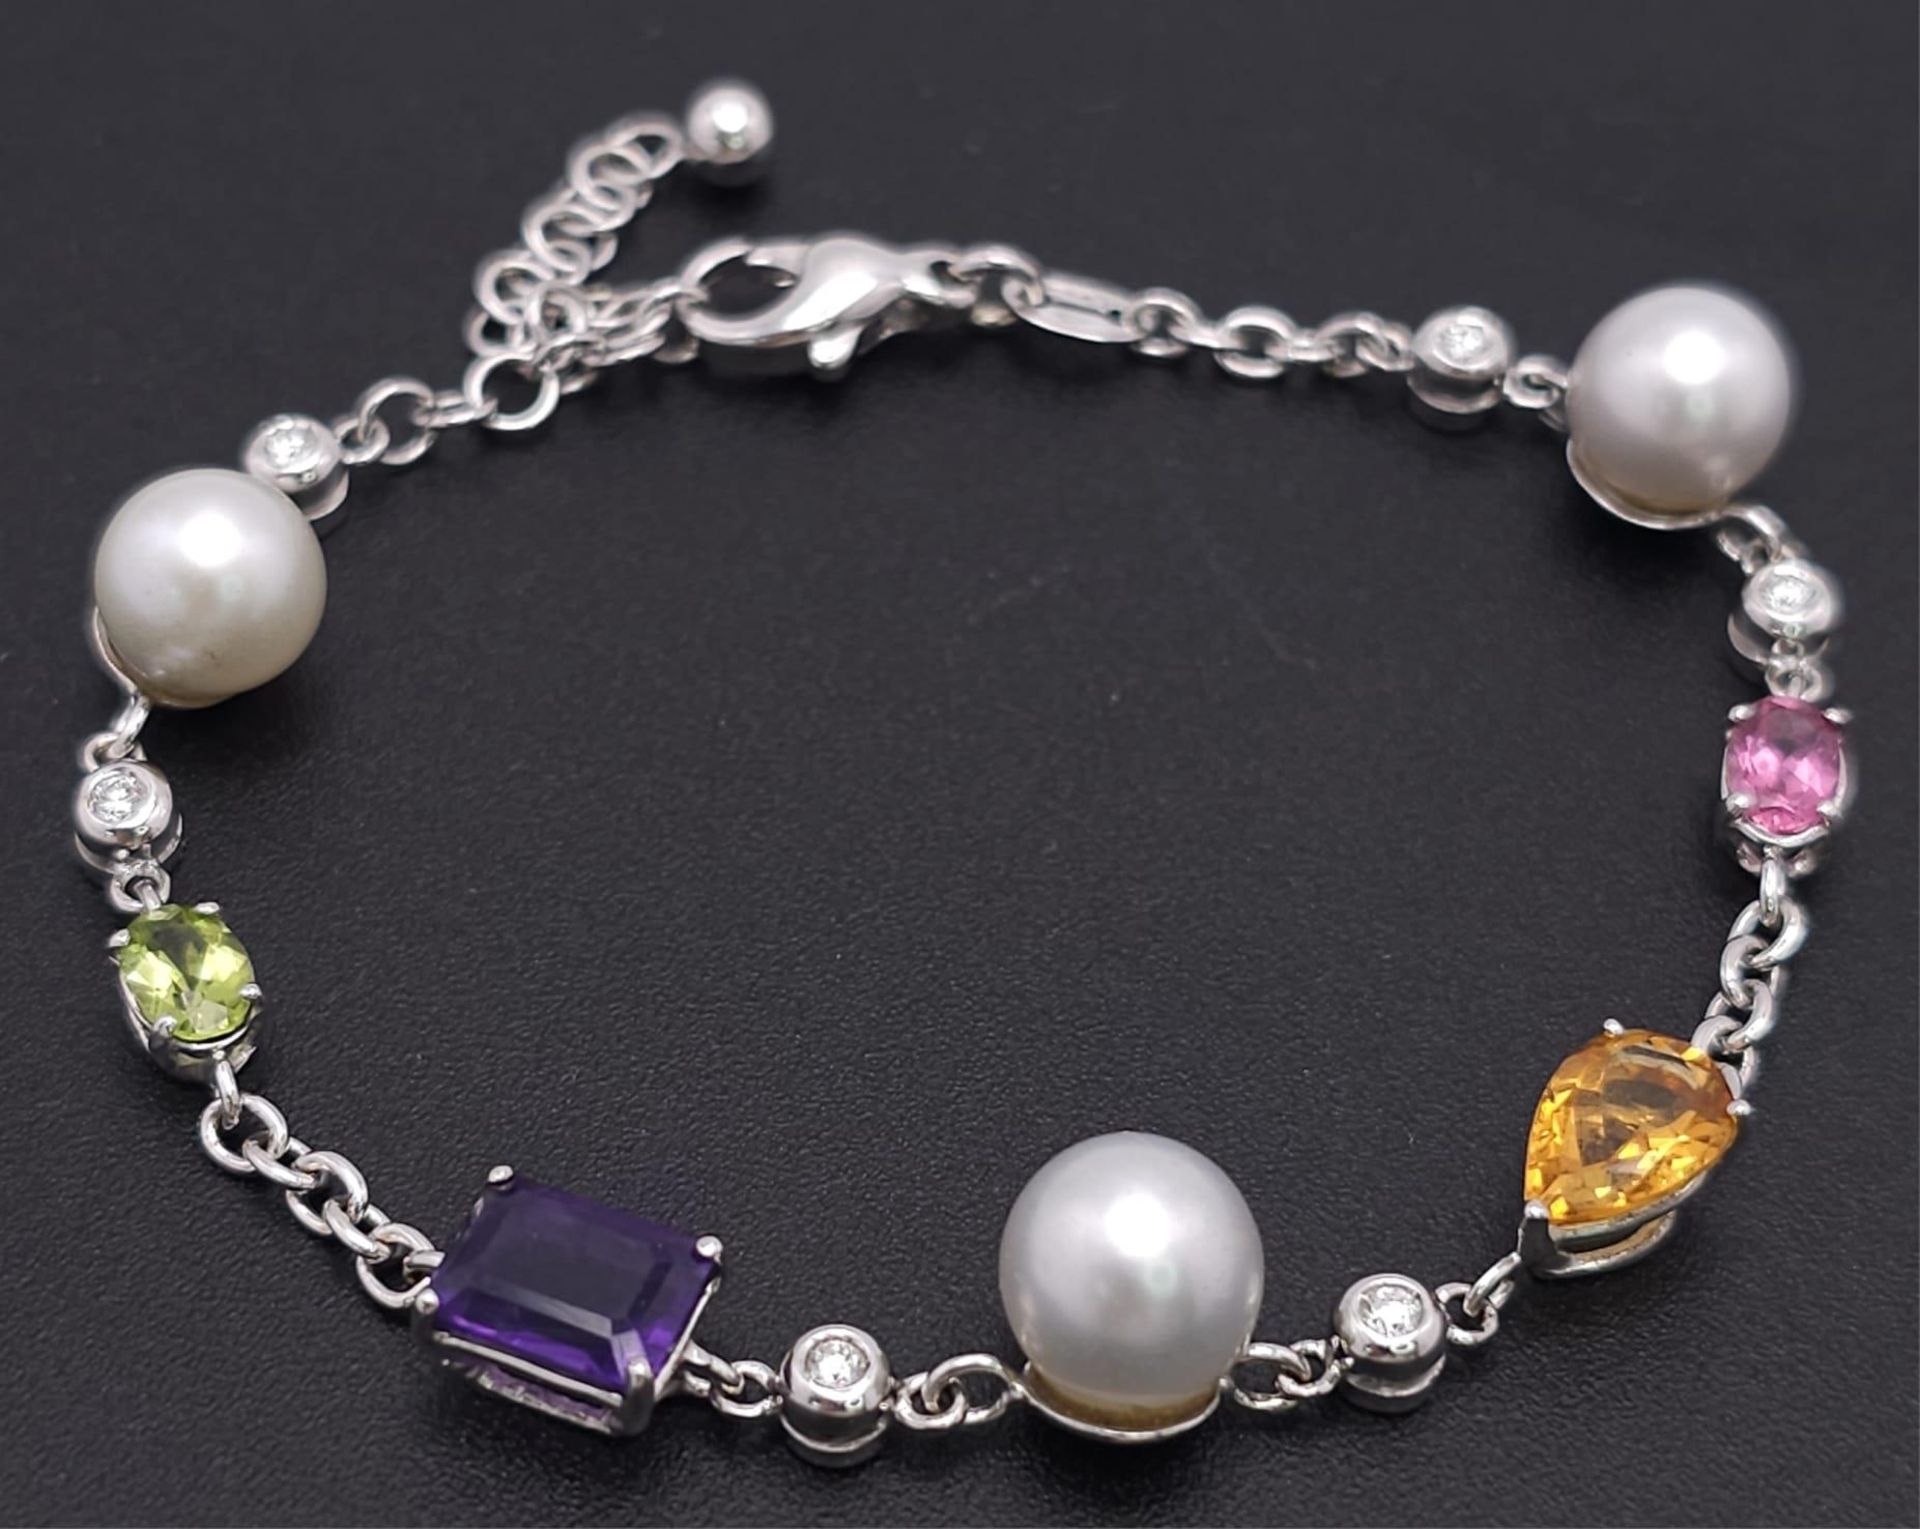 An 18 K white gold chain bracelet with a variety of gemstones (peridot, amethyst, citrine, etc) - Image 2 of 12